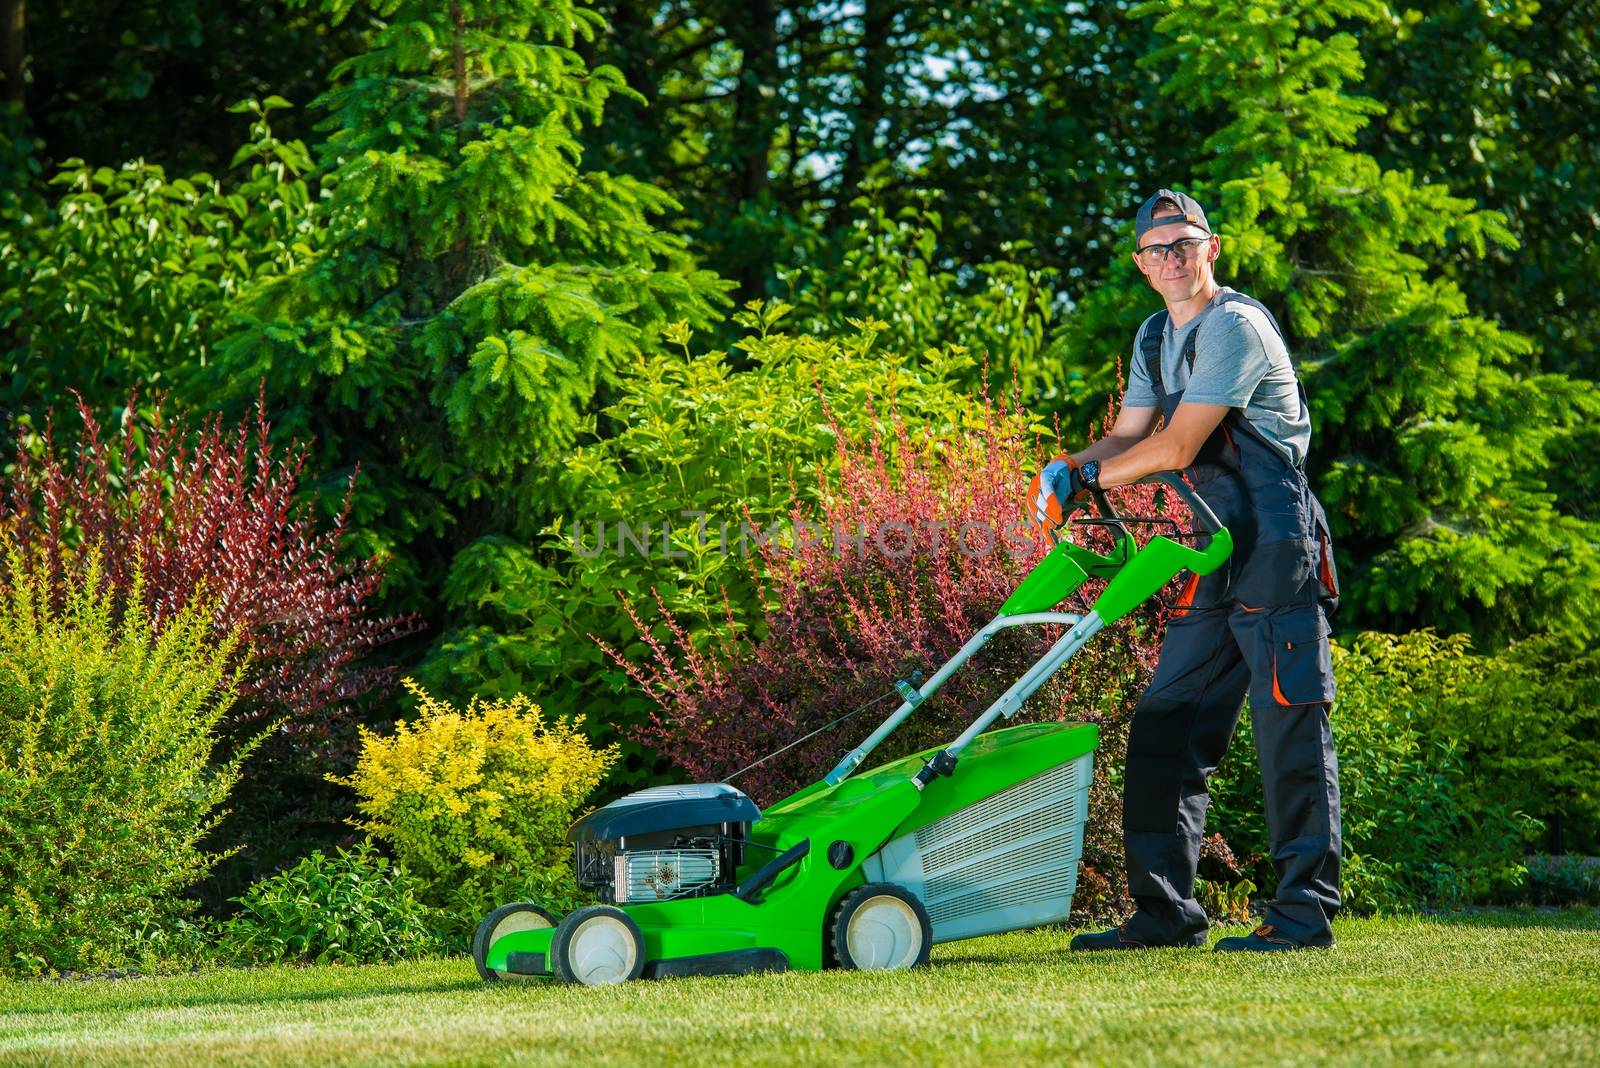 Smiling Professional Gardener with His Gasoline Lawn Mower. Professional Summer Landscaping Works